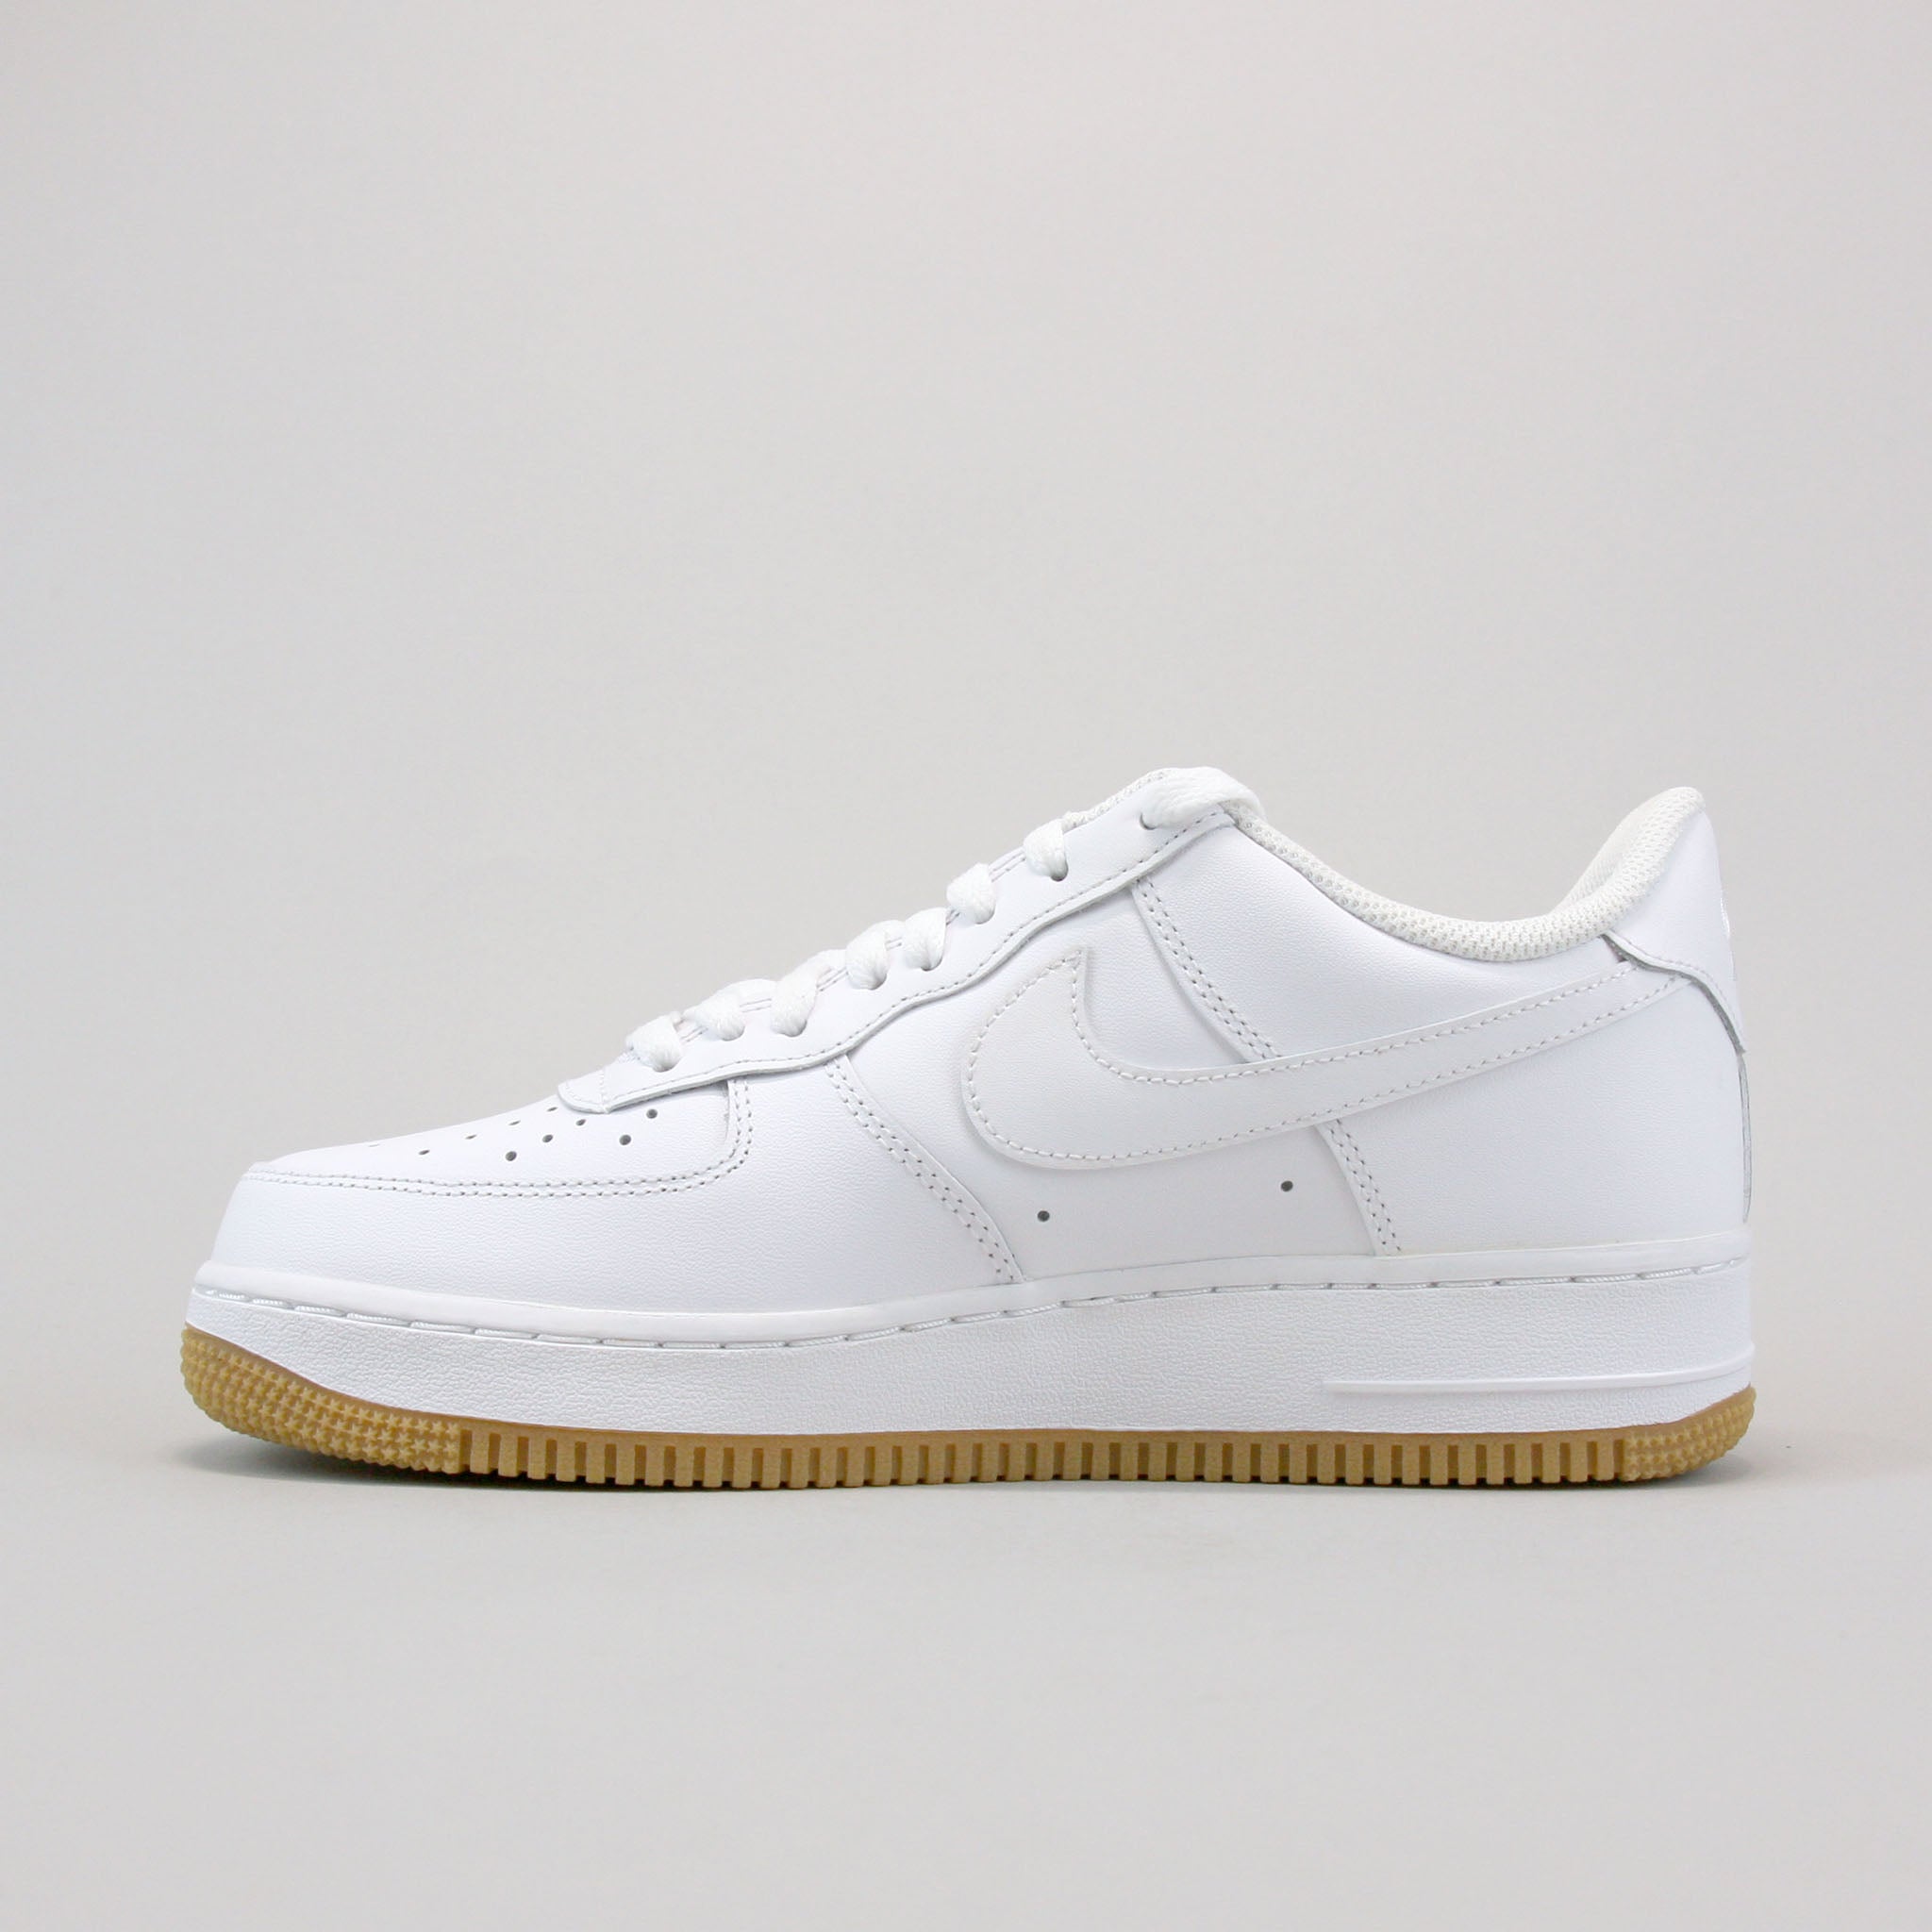 Nike Air Force 1 '07 'White Gum Light Brown' DJ2739-100 for Sale